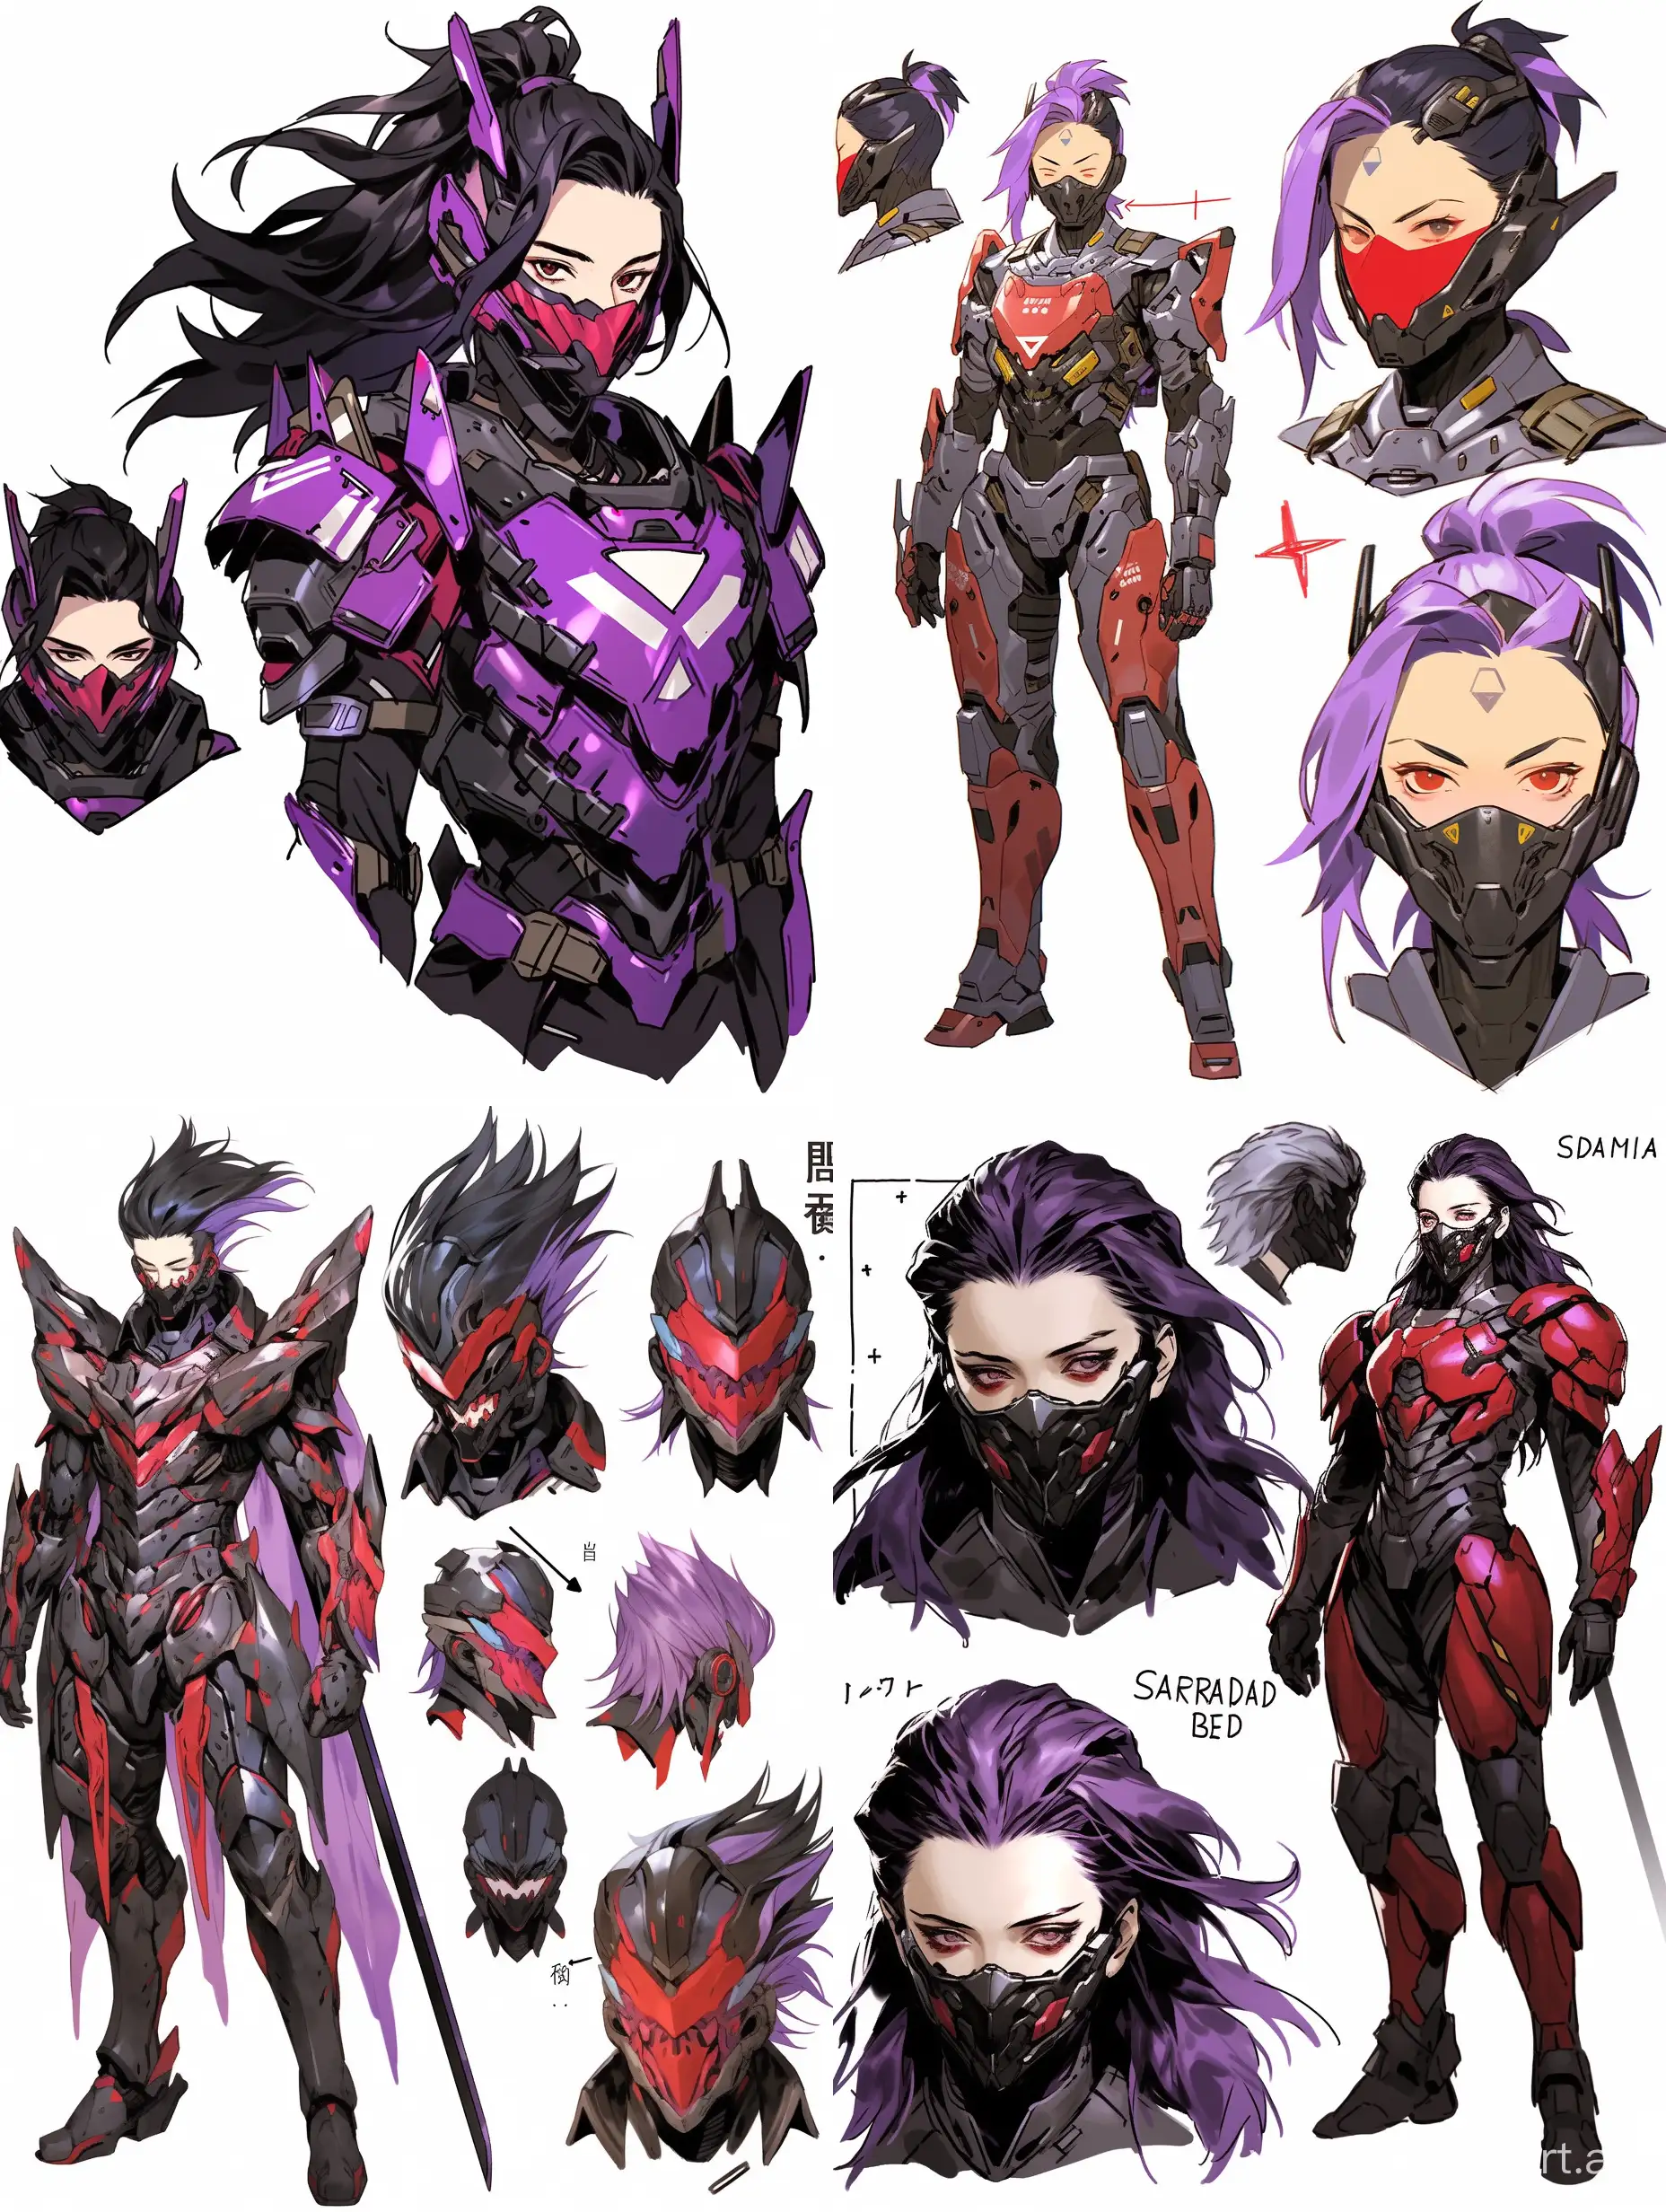 Futuristic-Warrior-in-Shredder-Armor-with-Purple-Eyes-and-Silver-Tactical-Suit